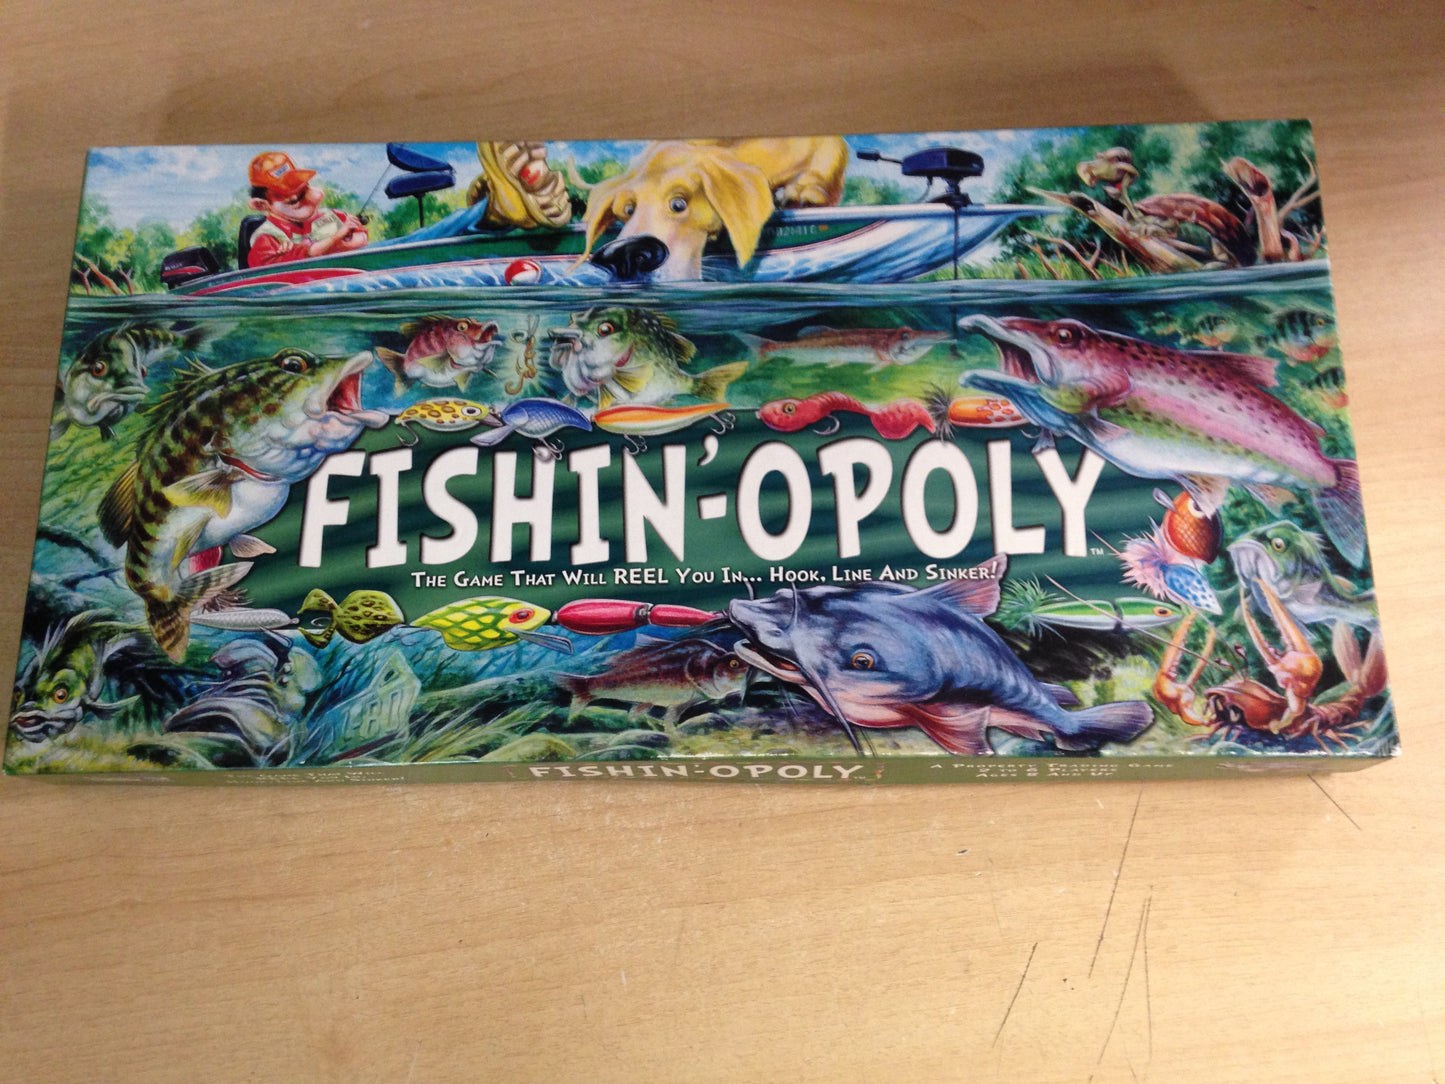 Game Fishin Opoly Monopoly As New Complete